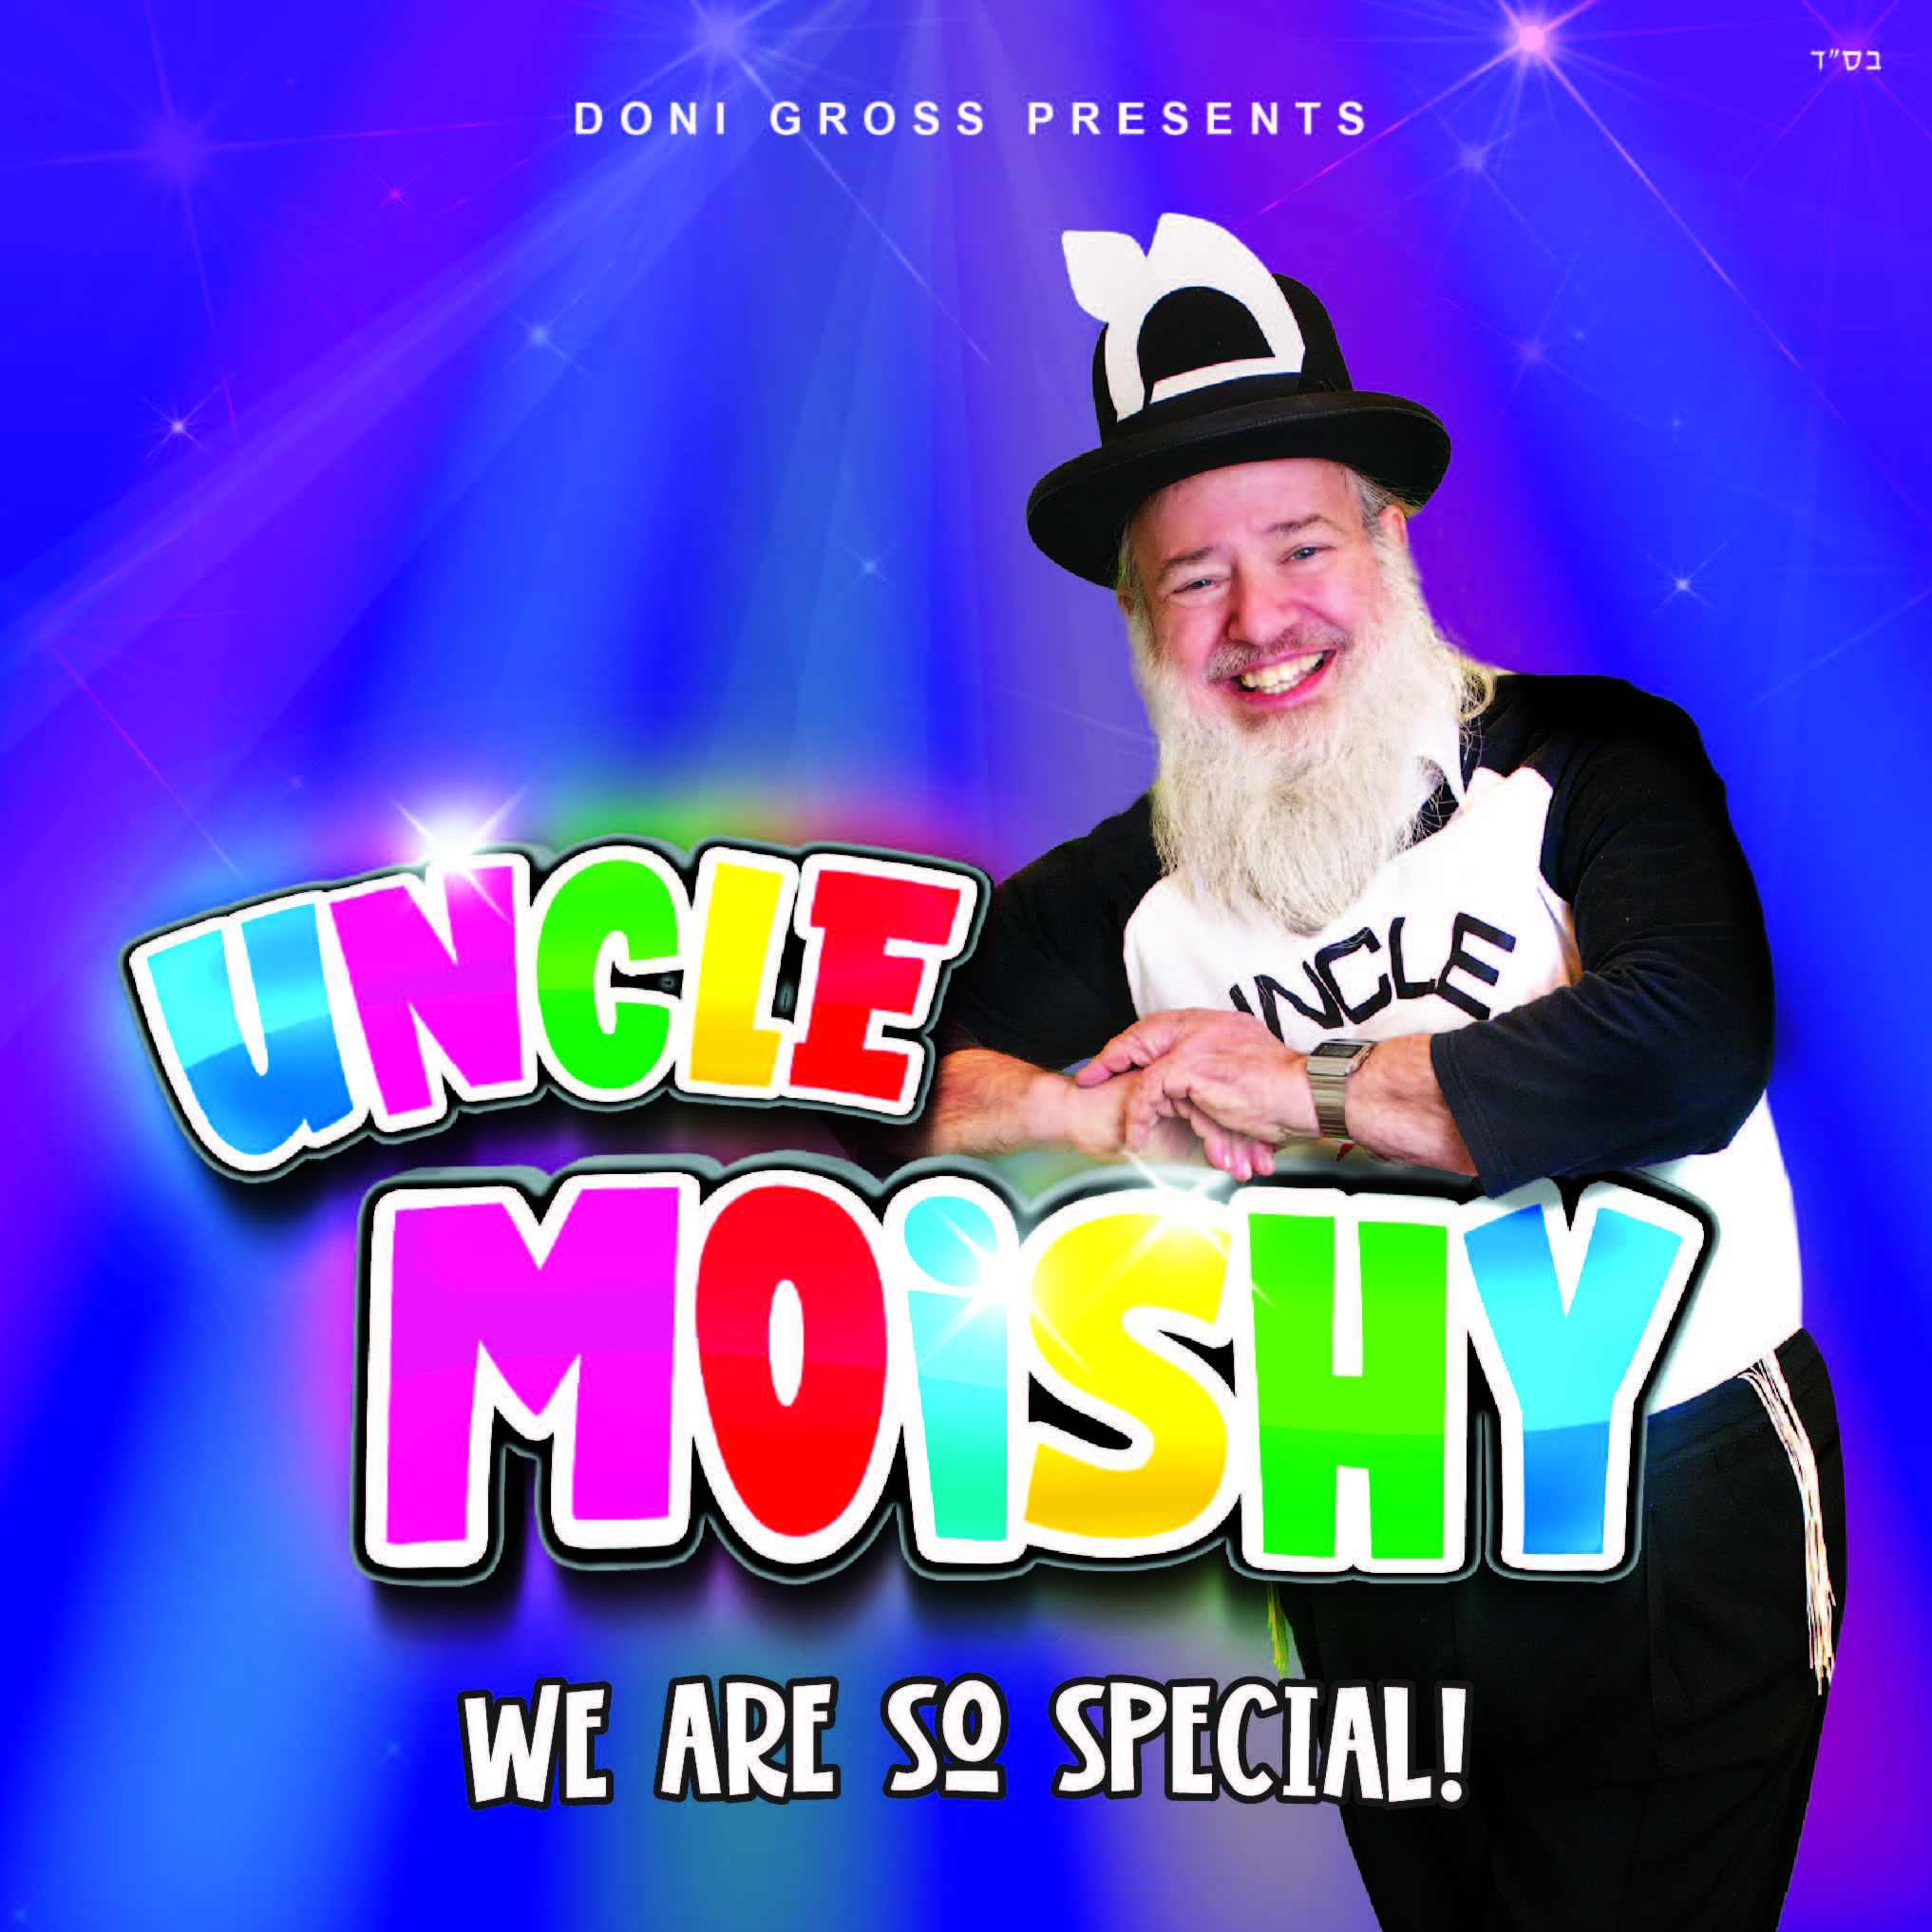 The album cover for Uncle Moishy's "We Are So Special"